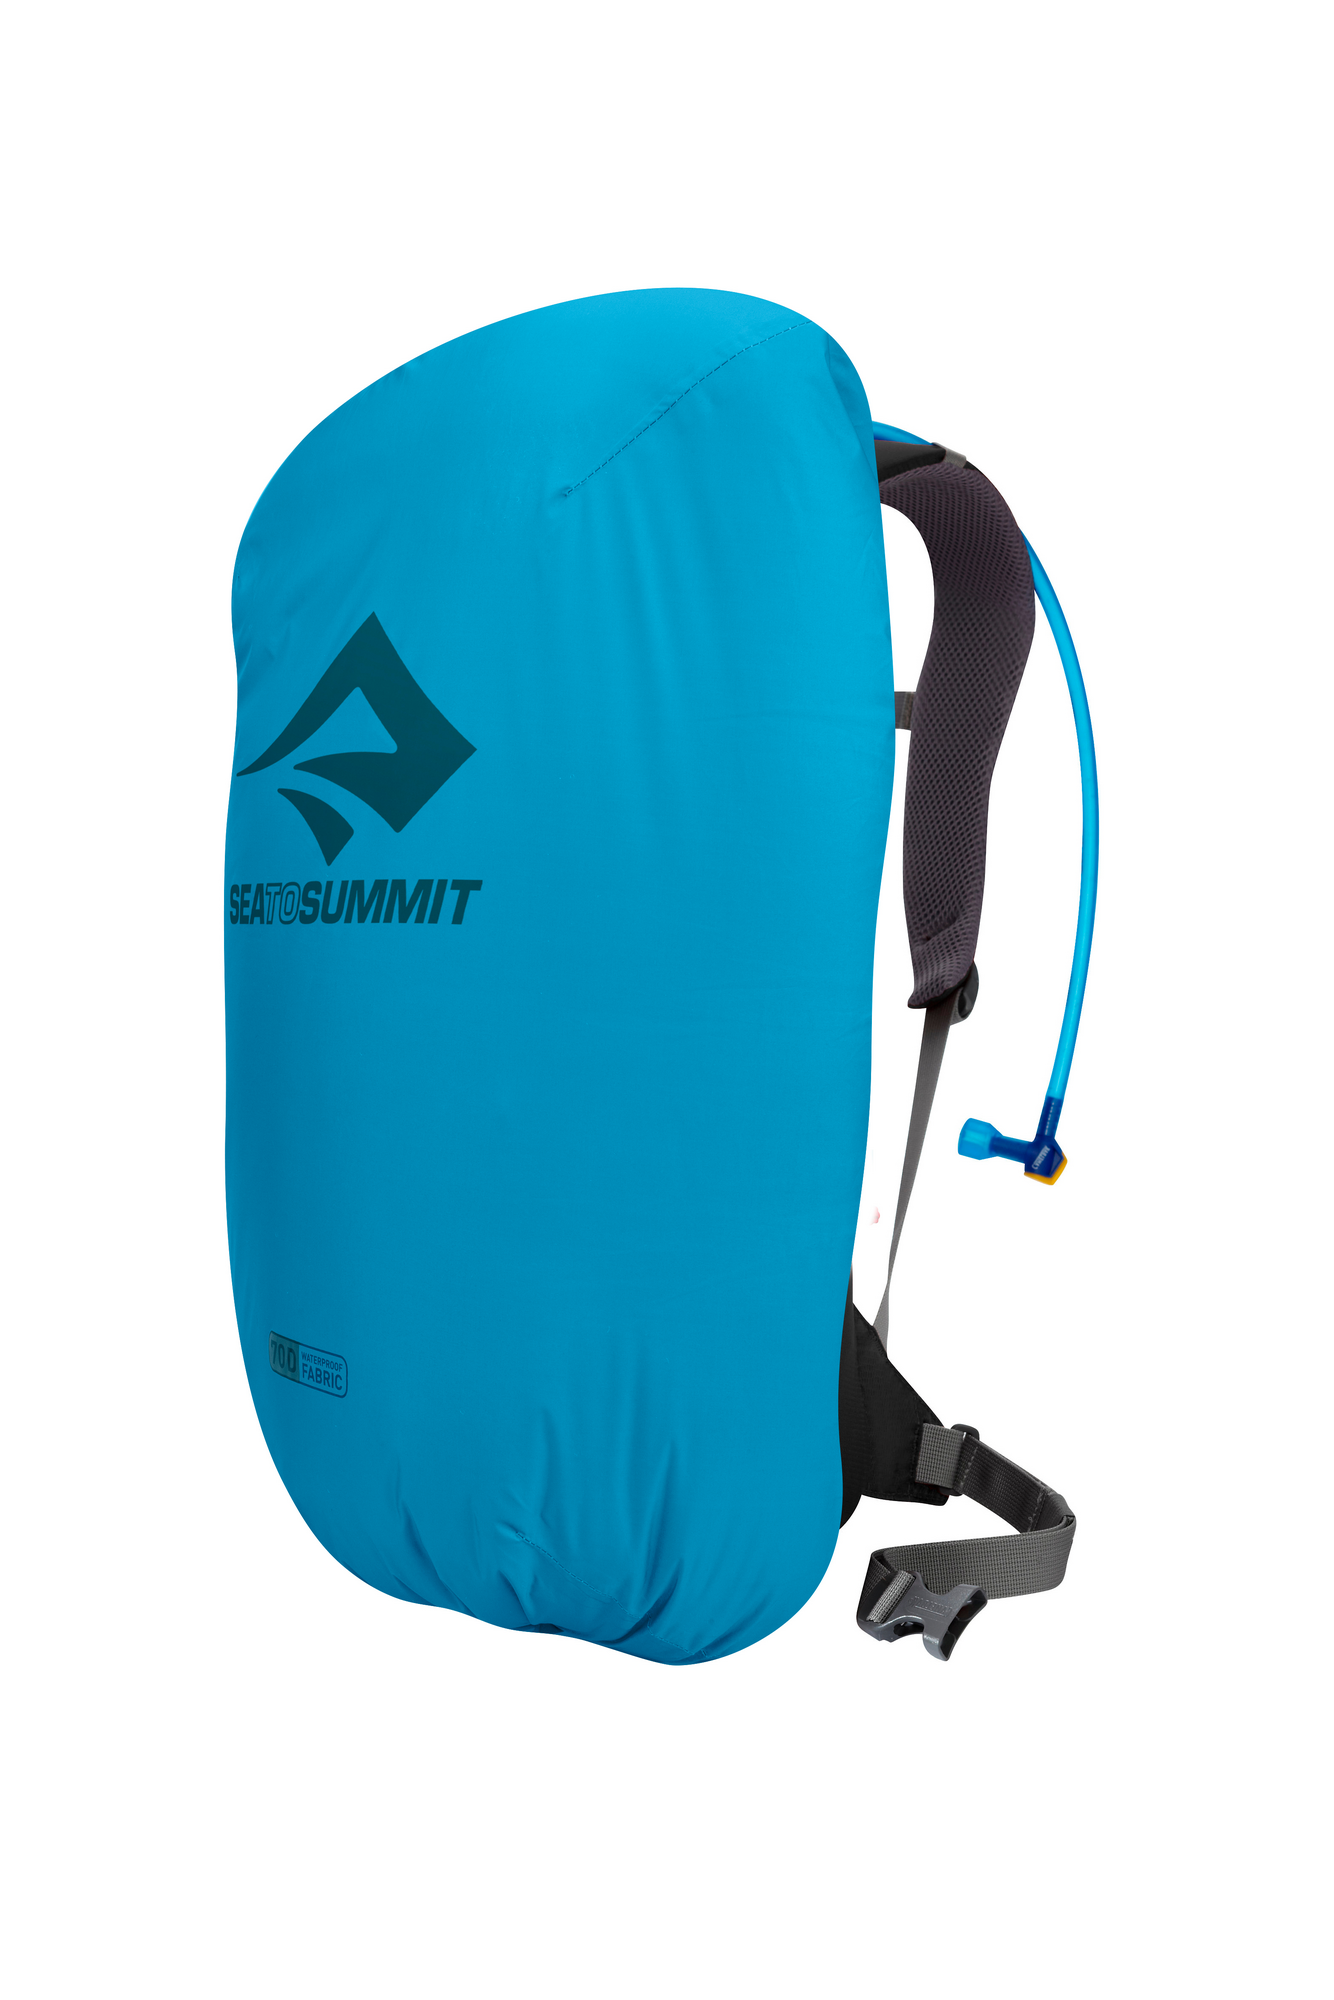 Sea to Summit 70D nylon backpack cover